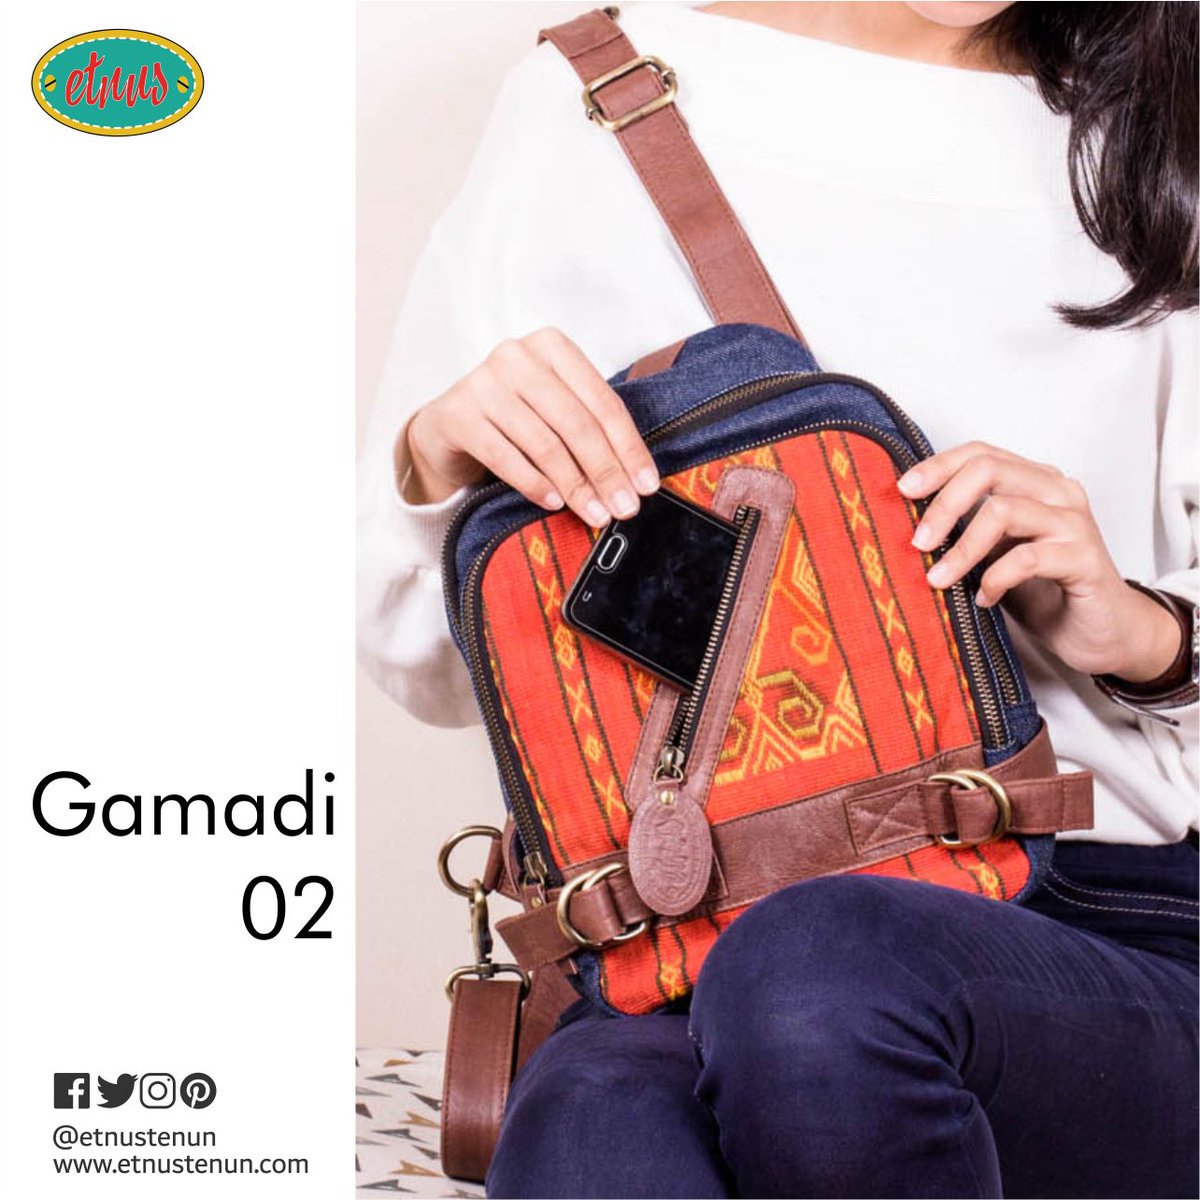 Wear Gamadi to ground a casual yet elegant blouse or with a simple but chic tops. One way to elevate the look. 

#casualbag
#backpackforwoman
#casualbackpack
#casualstyle
#ethnicstyle
#denimbag
#tasetnik
#tasranselwanita
#giniginigoonline

etnustenun.com/woven-bags/gam…